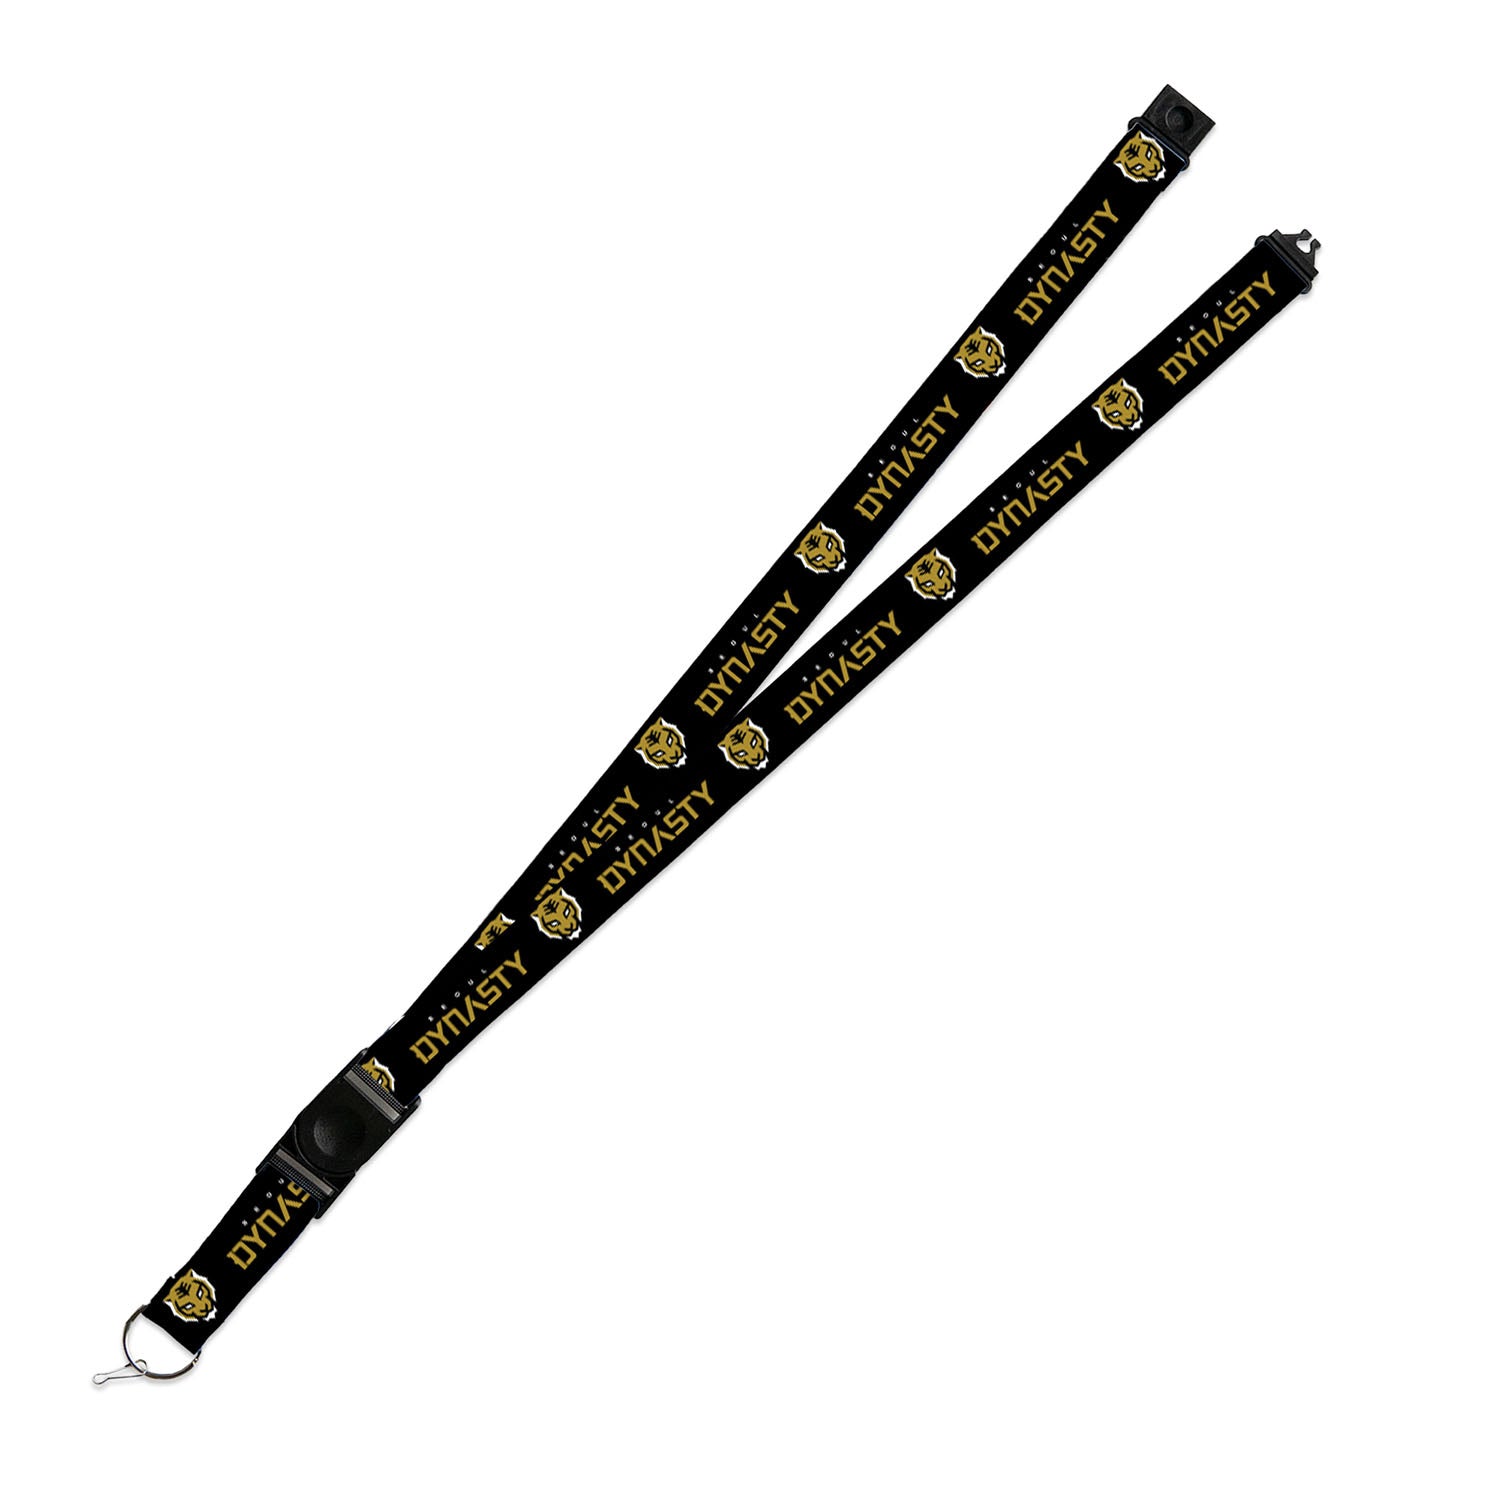 Seoul Dynasty Lanyard in Black - Front View